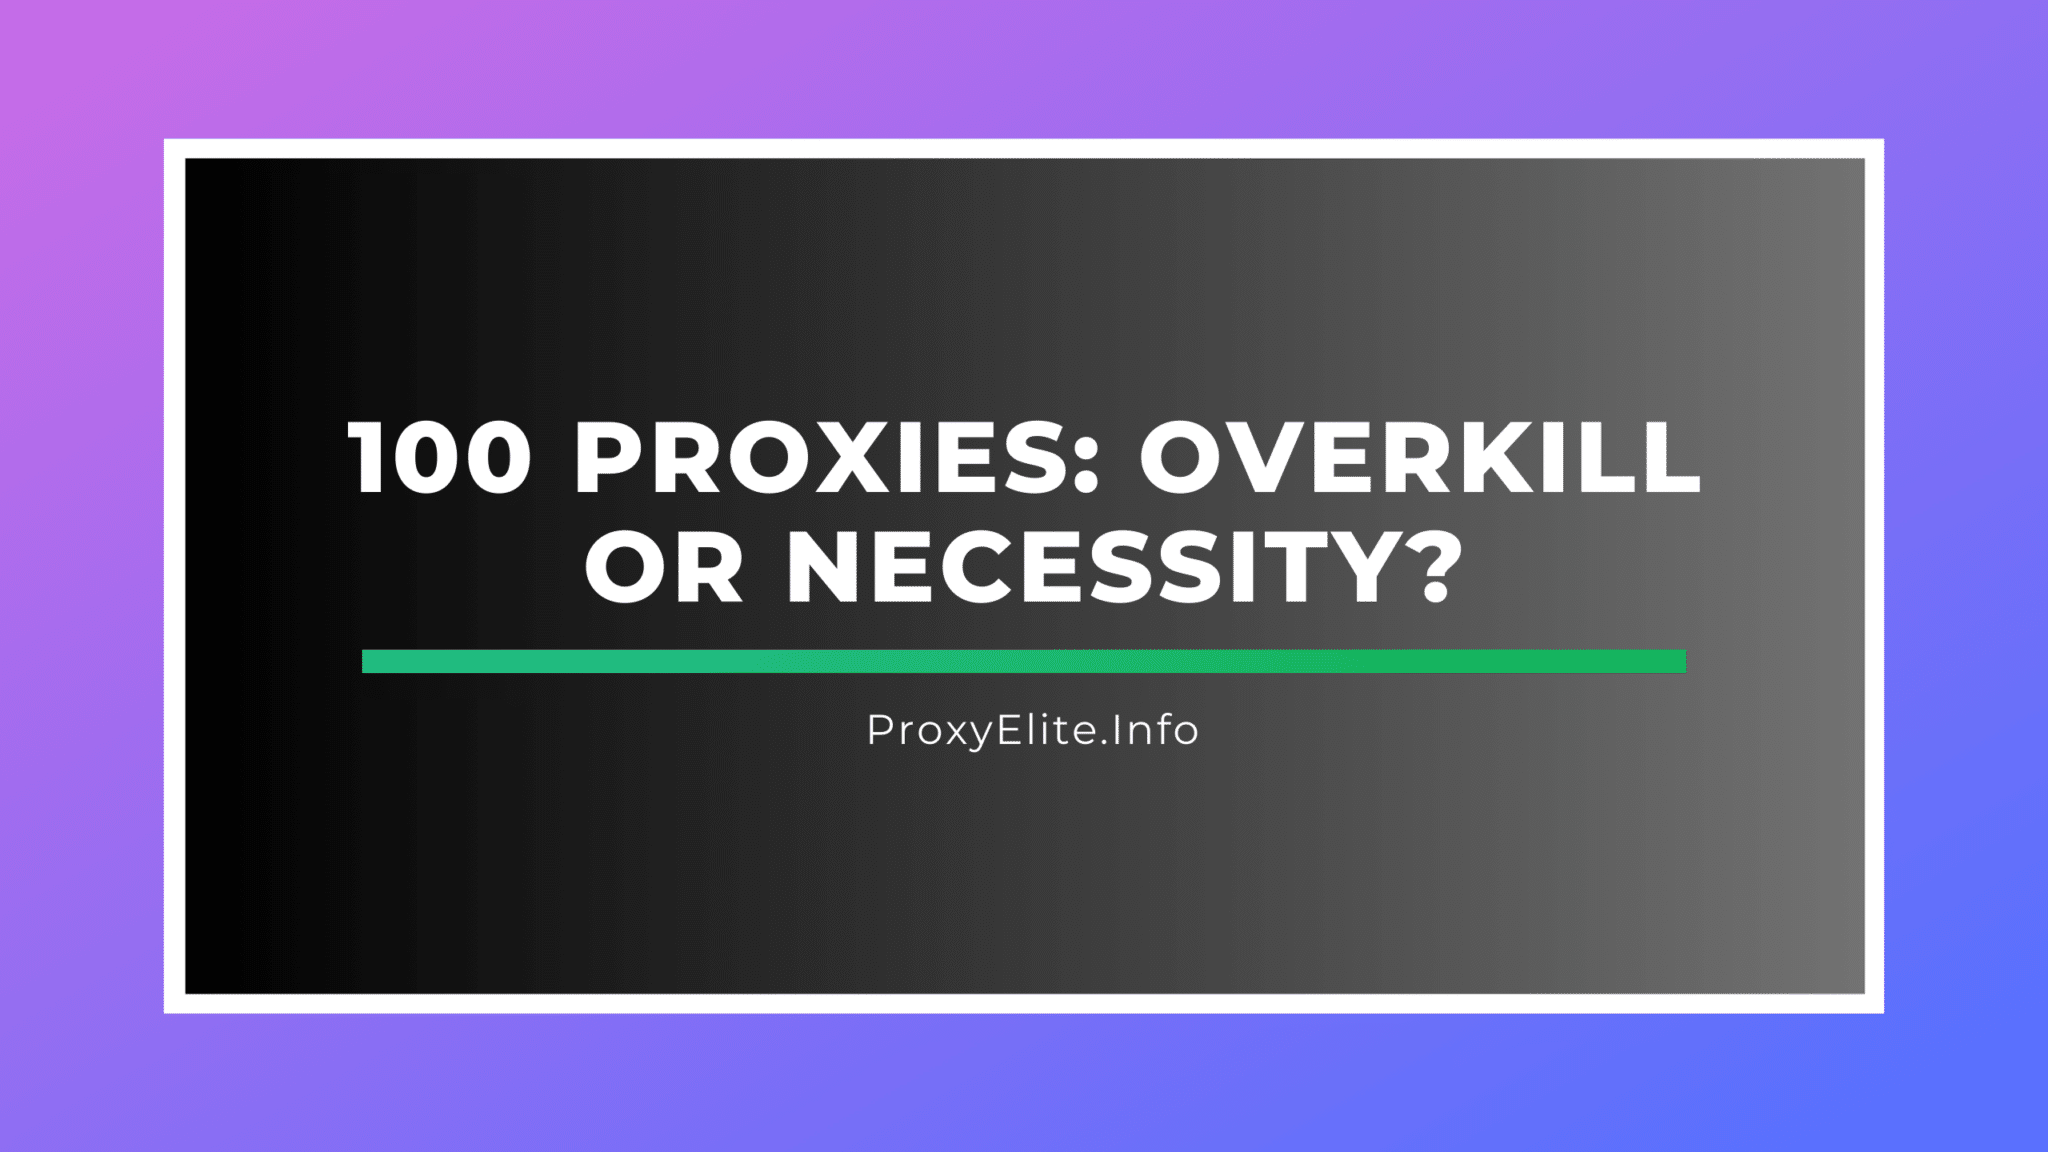 100 Proxies: Overkill or Necessity?